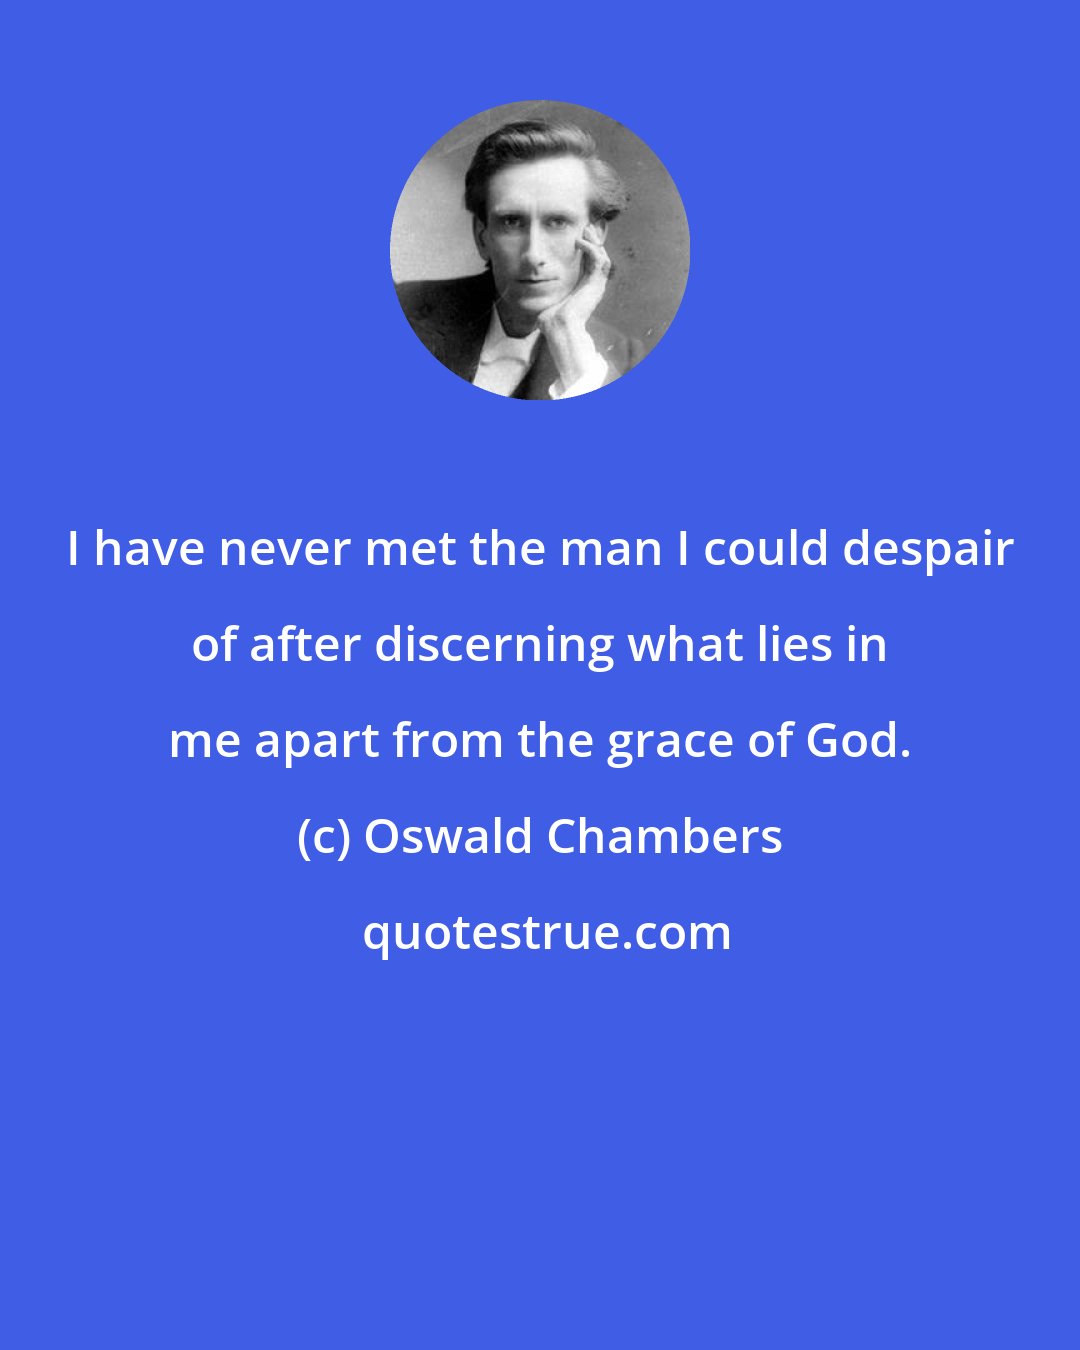 Oswald Chambers: I have never met the man I could despair of after discerning what lies in me apart from the grace of God.